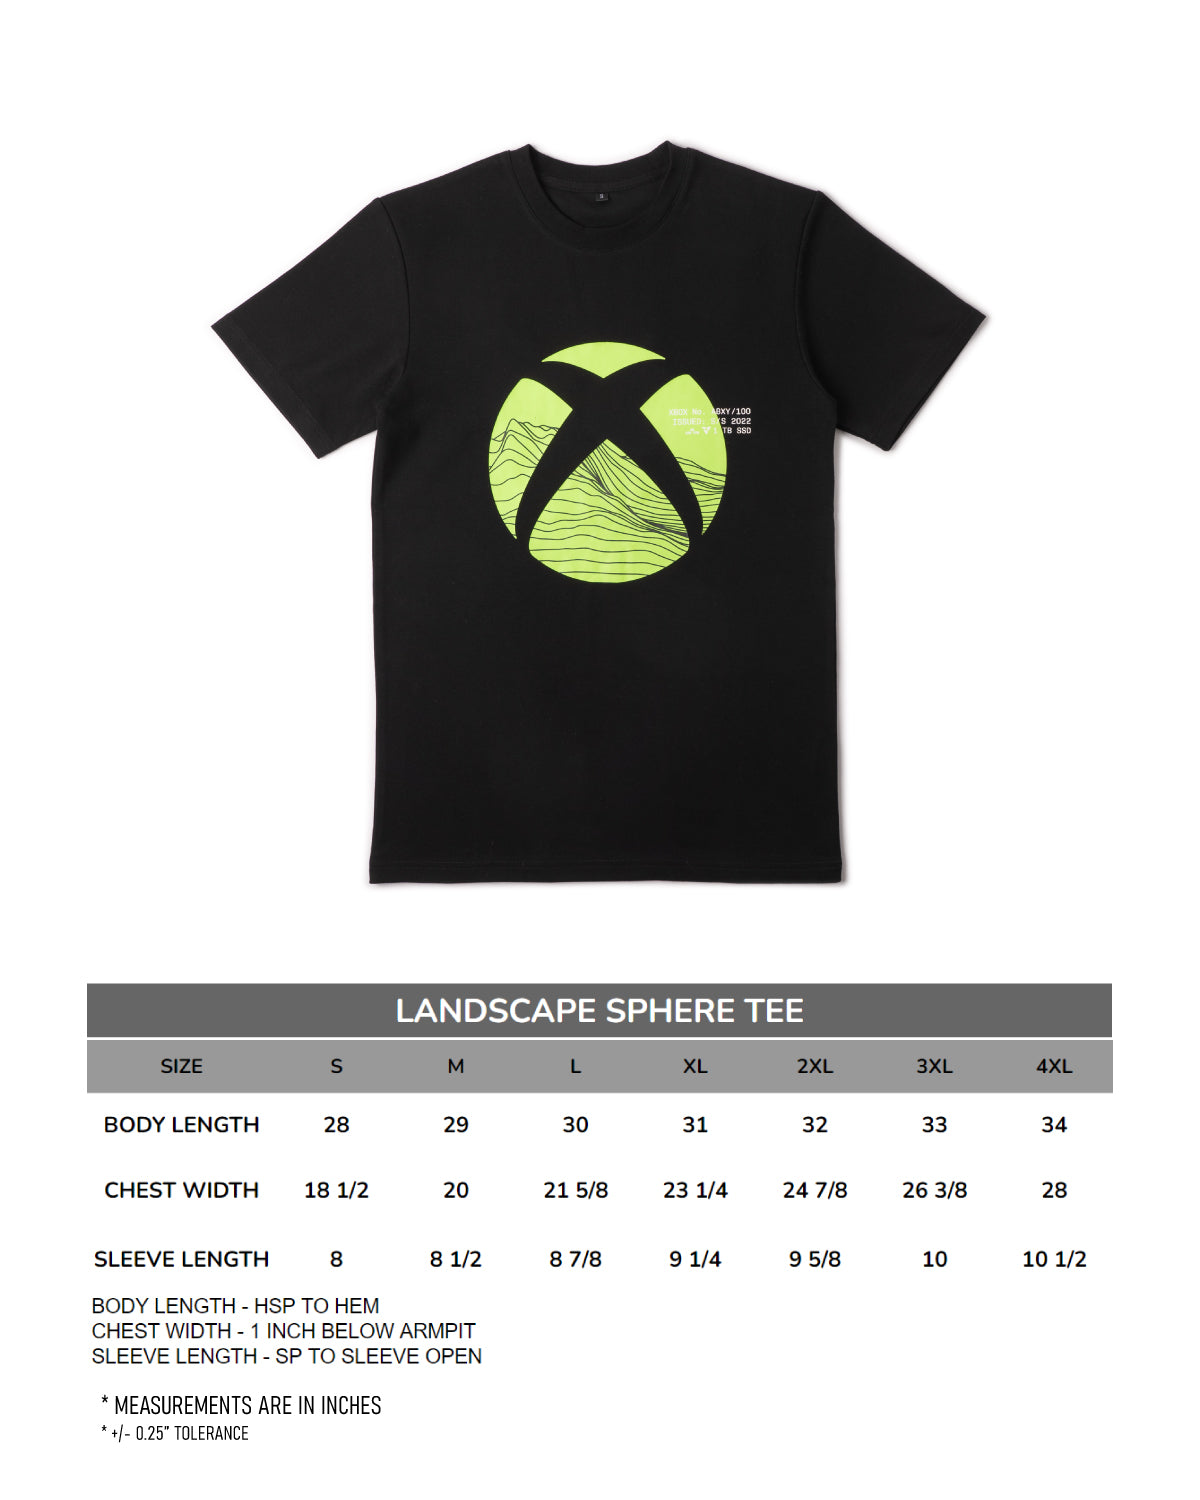 The Outer Worlds – Xbox Gear Shop